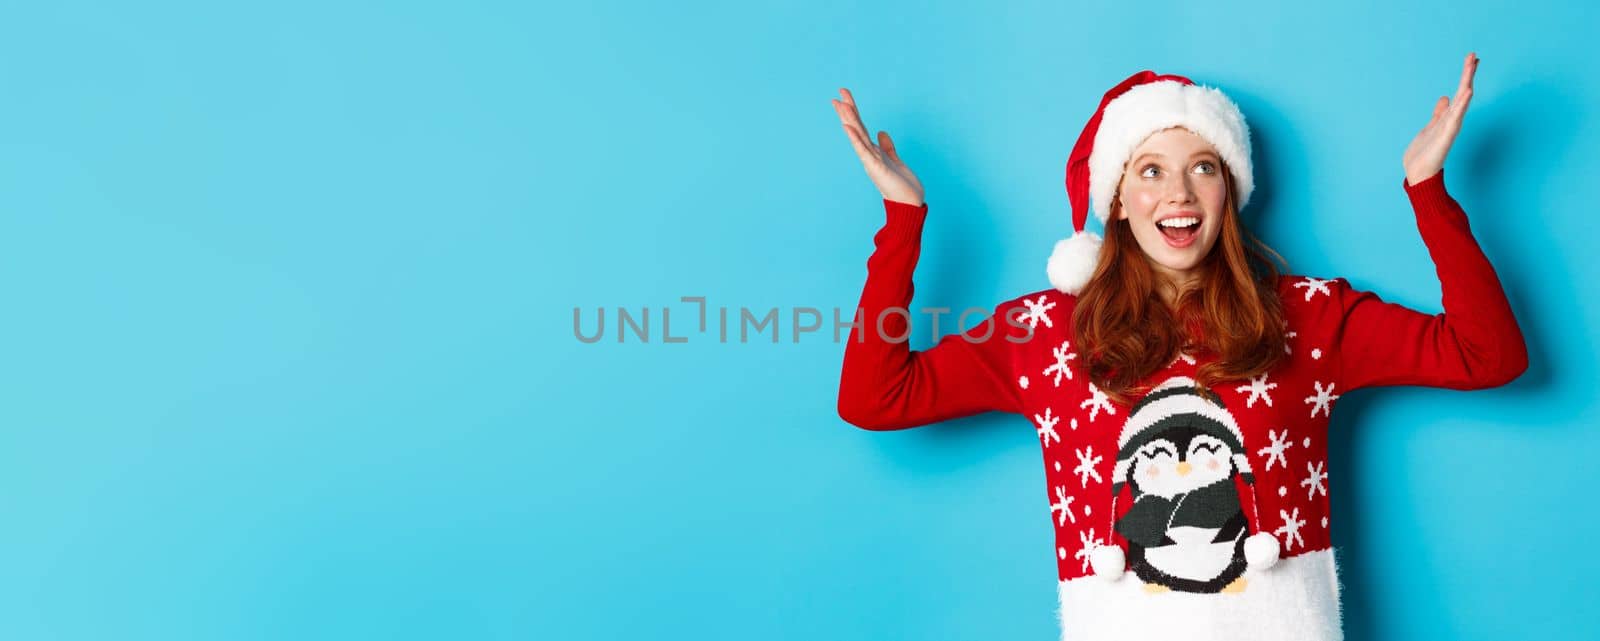 Happy holidays and Christmas concept. Excited redhead girl rejoicing of something falling on her, raising hands up delighted and smiling, wearing Santa hat with xmas sweater, blue background.